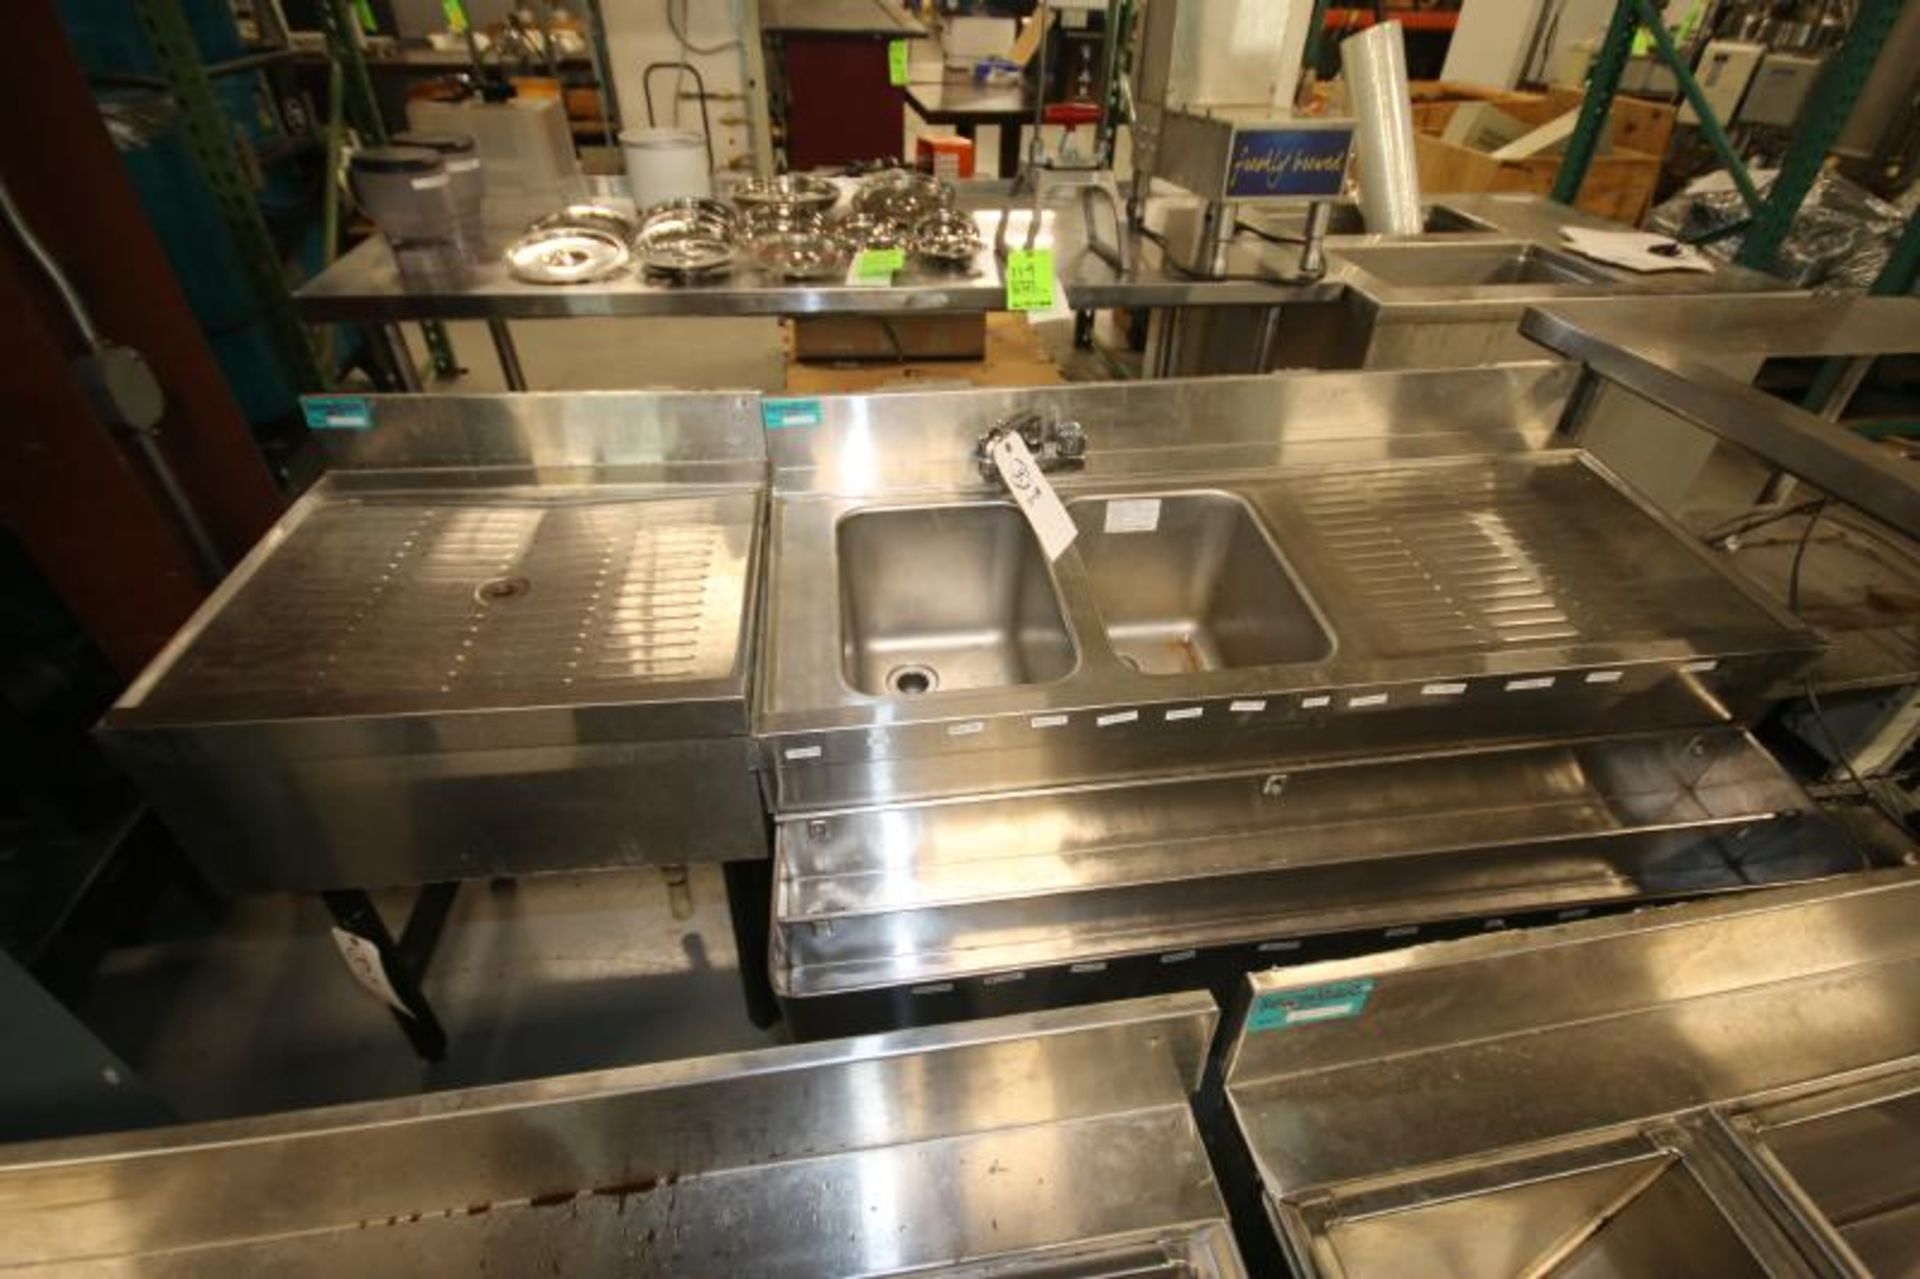 6 pcs Assorted S/S Restaurant Sink Stations, Includes Cleveland Steam Craft Oven, Model 21CGAS, 120V - Image 3 of 3